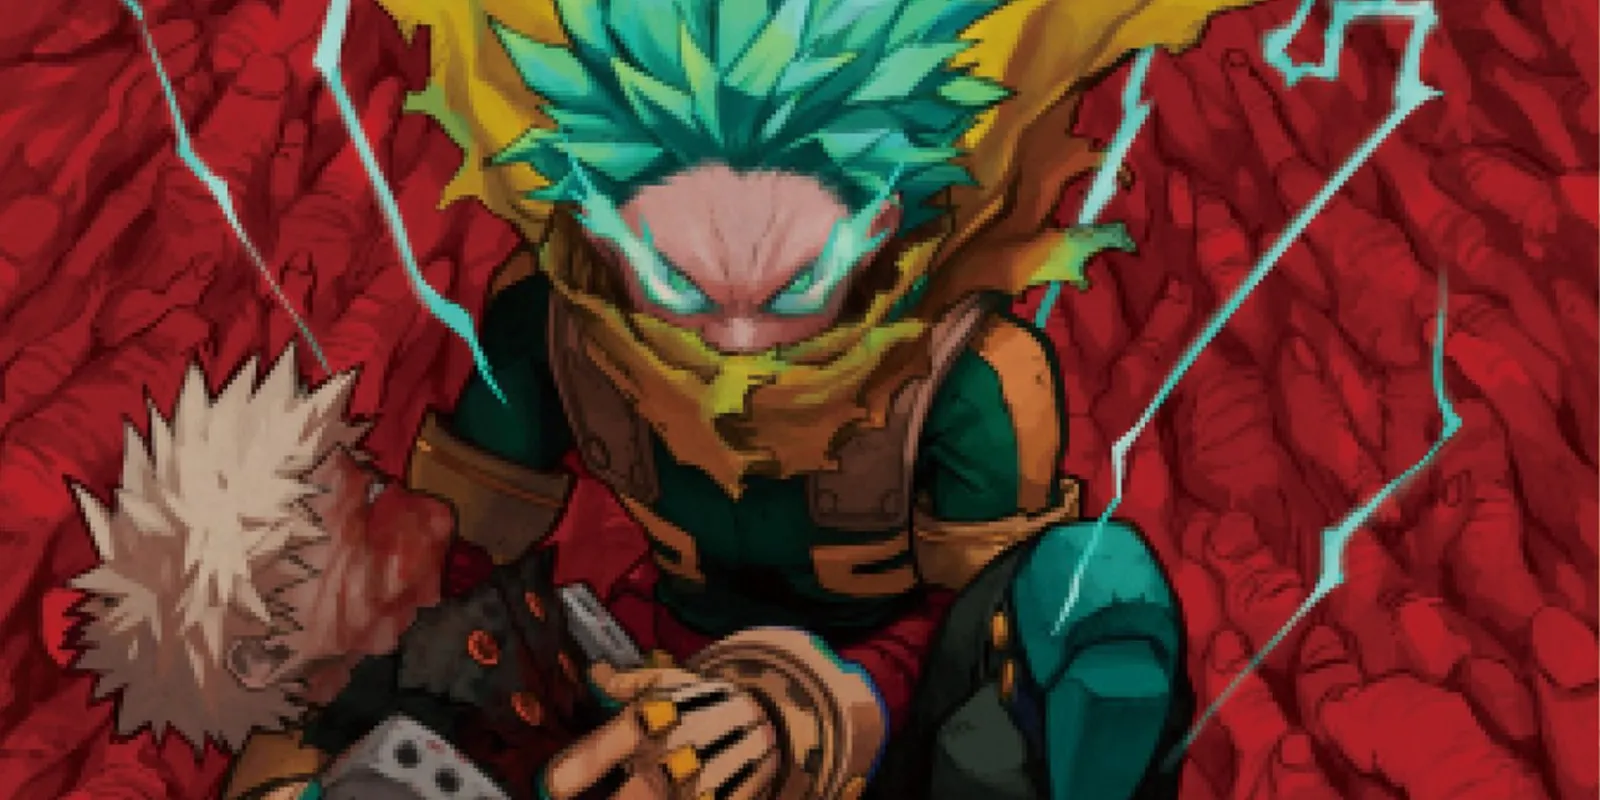 Exciting Finale Ahead My Hero Academia's Final War Saga Nears Its Thrilling Conclusion-